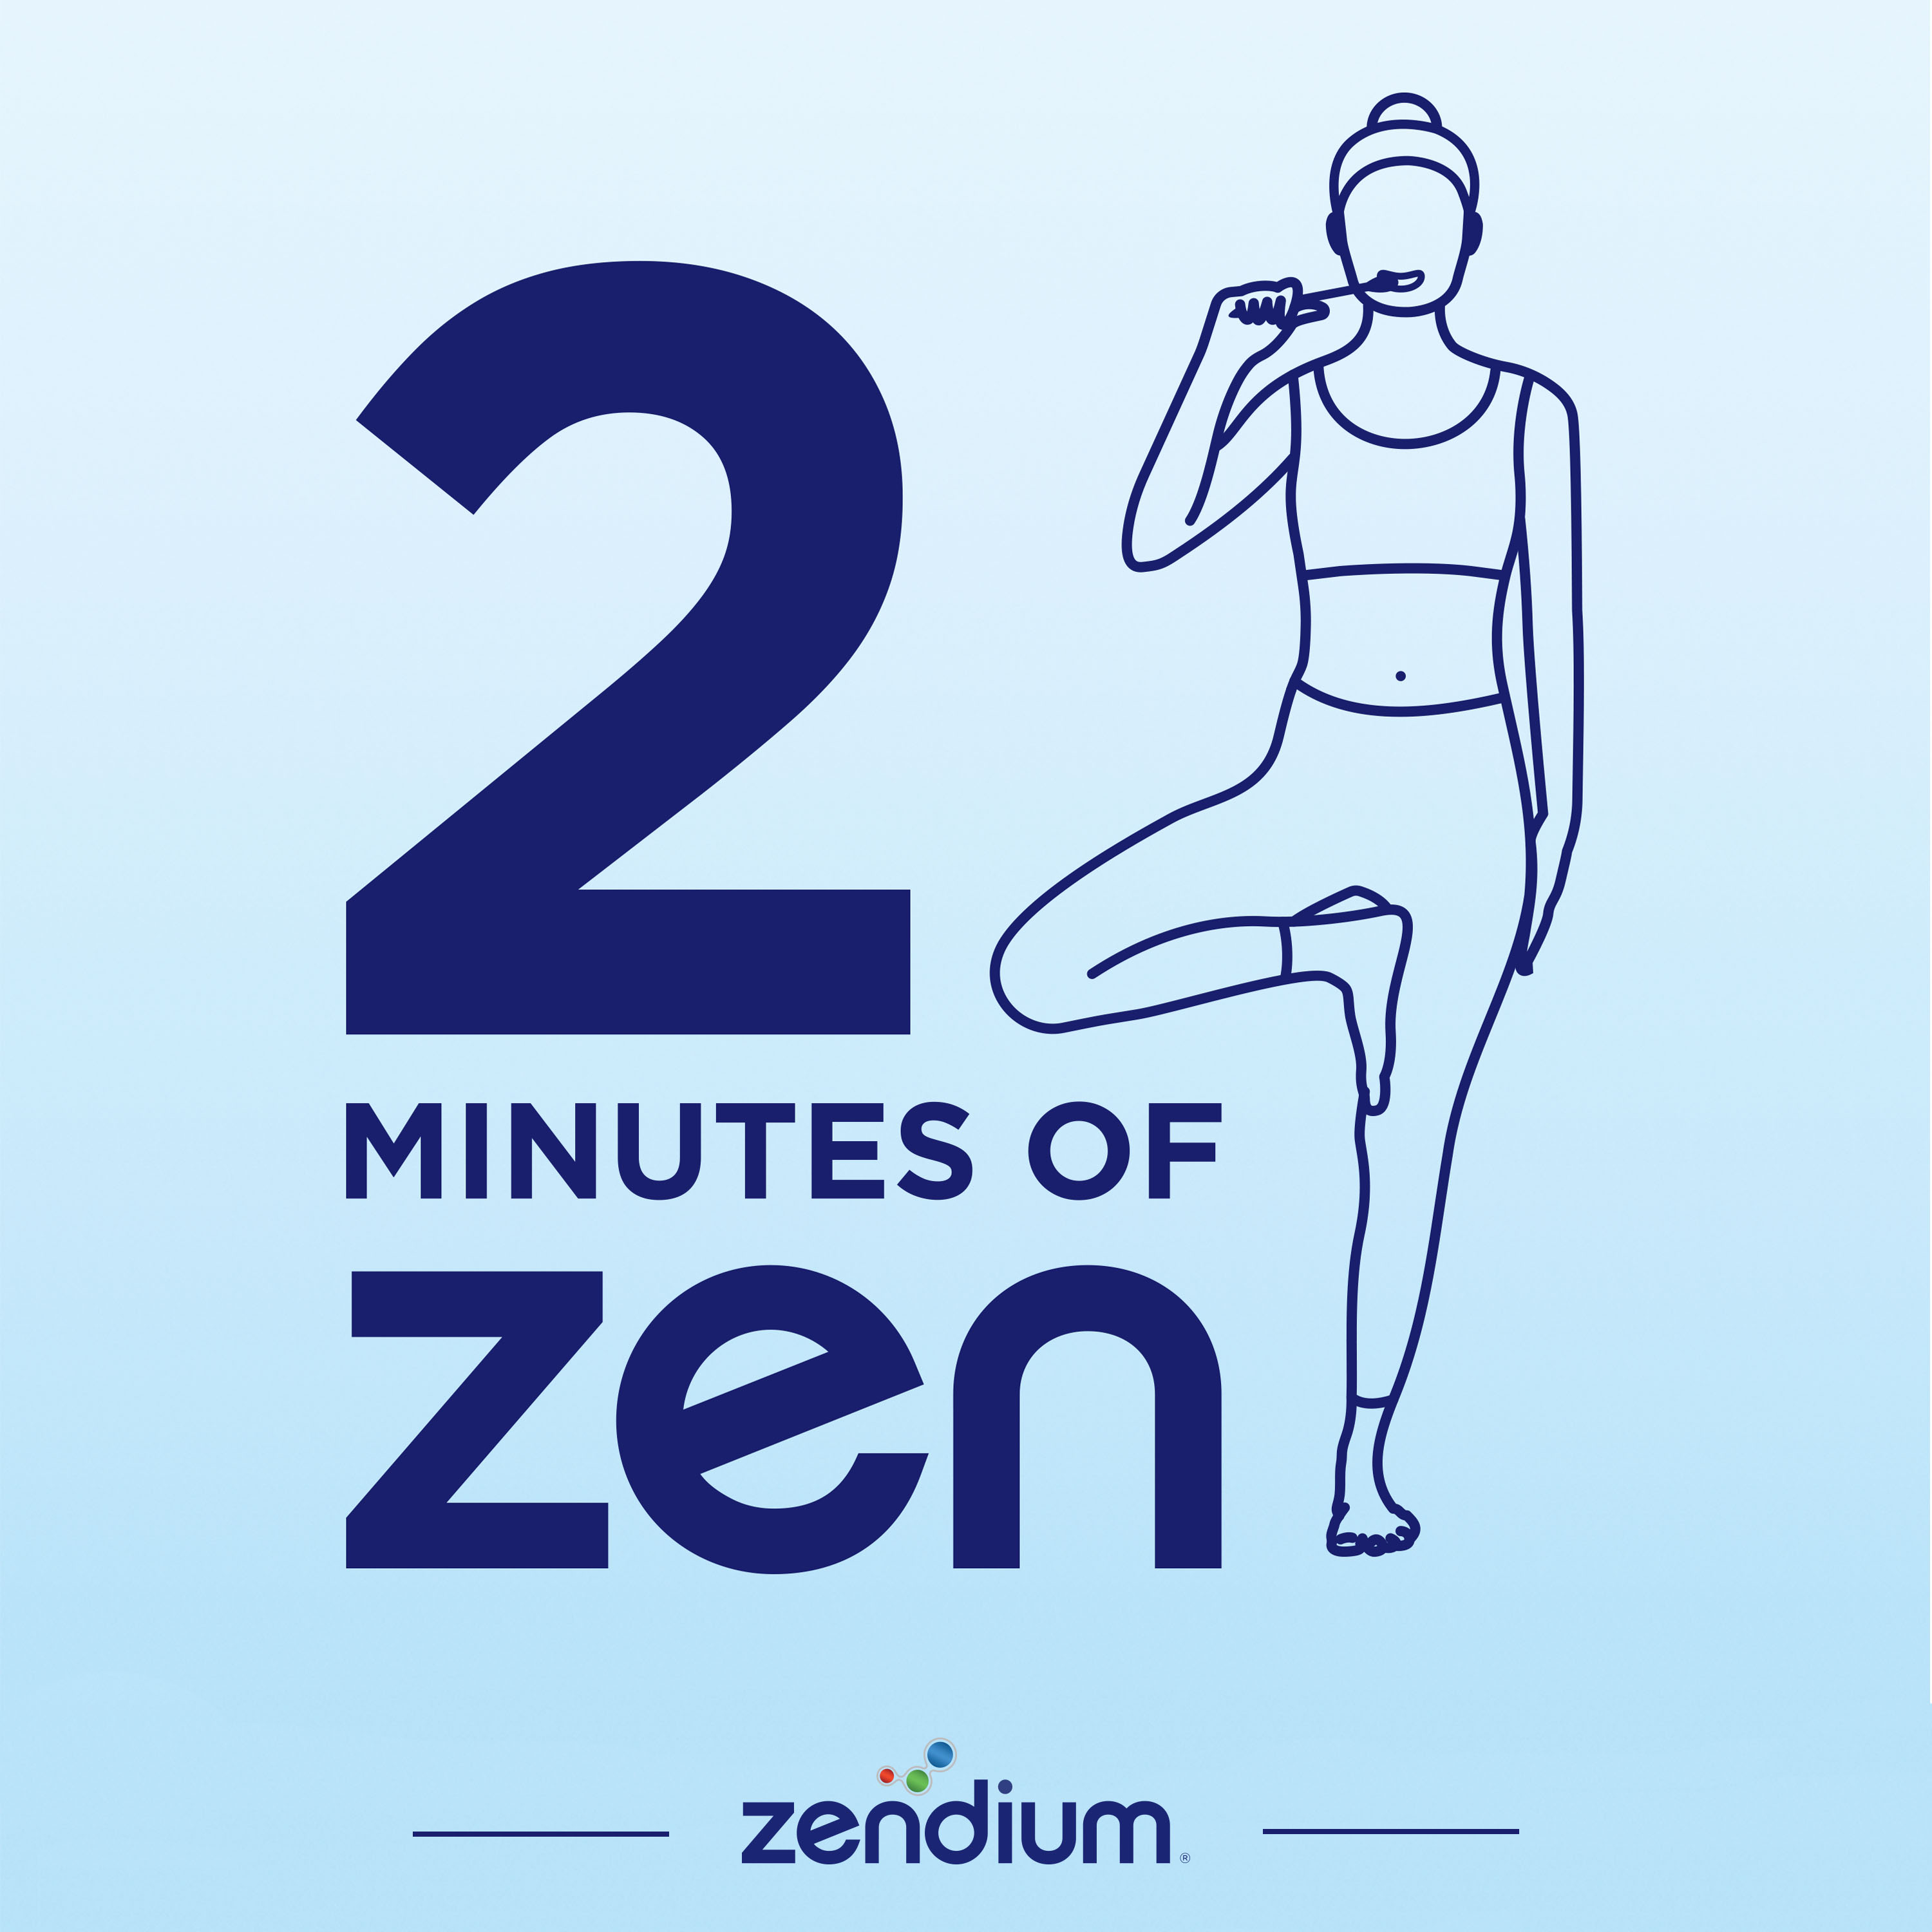 Fitting into the listener's day, with Zendium Toothpaste